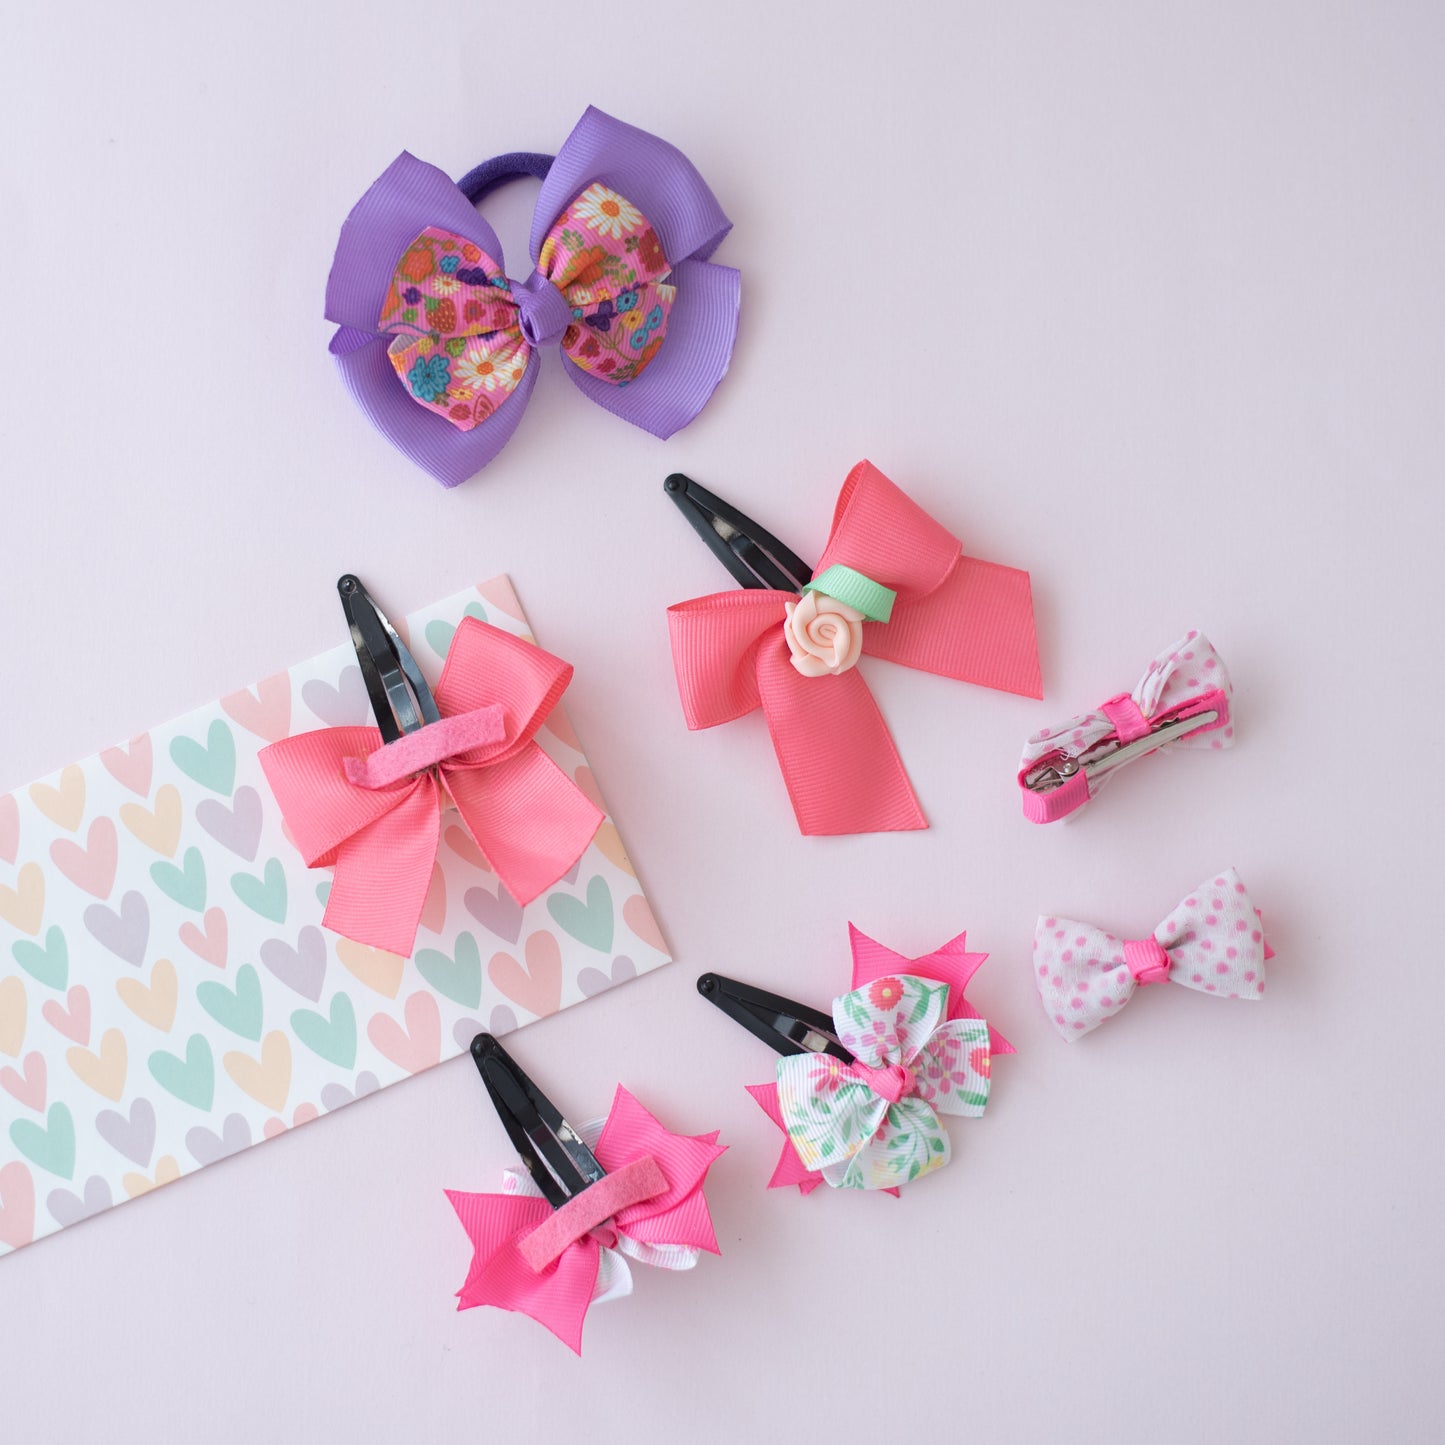 Combo: Cute double bow rubberband, peach dazzling rose embellished bow on tic-tac pins, pink and white double bow on  tic-tac clips and polka dotted alligator clips - Purple, Peach, White, Pink